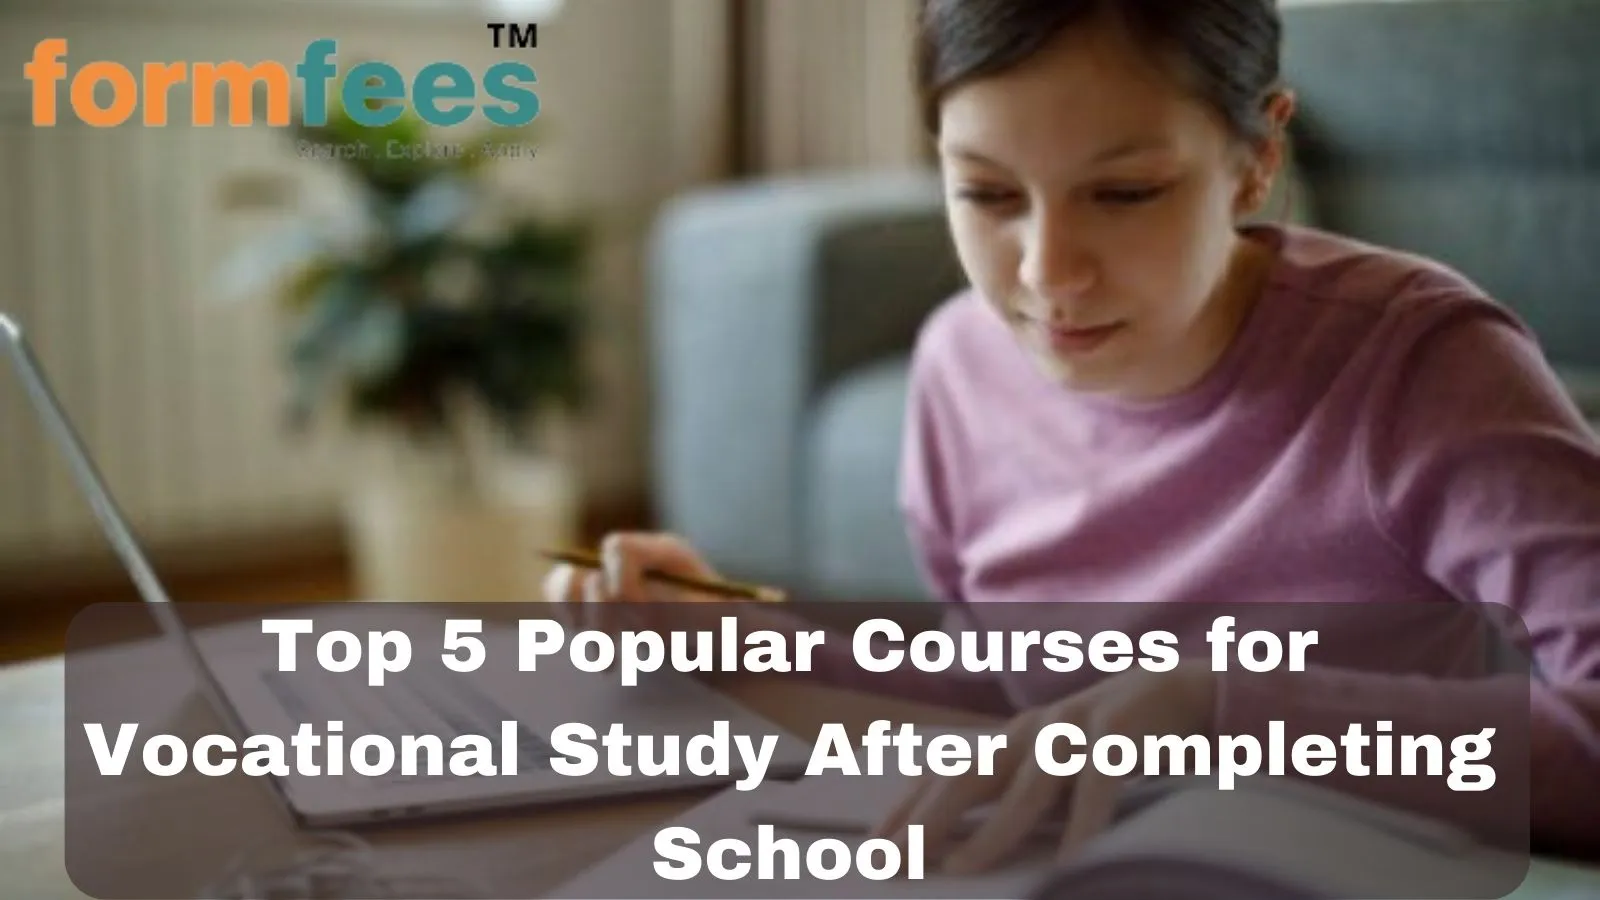 Top 5 Popular Courses for Vocational Study After Completing School